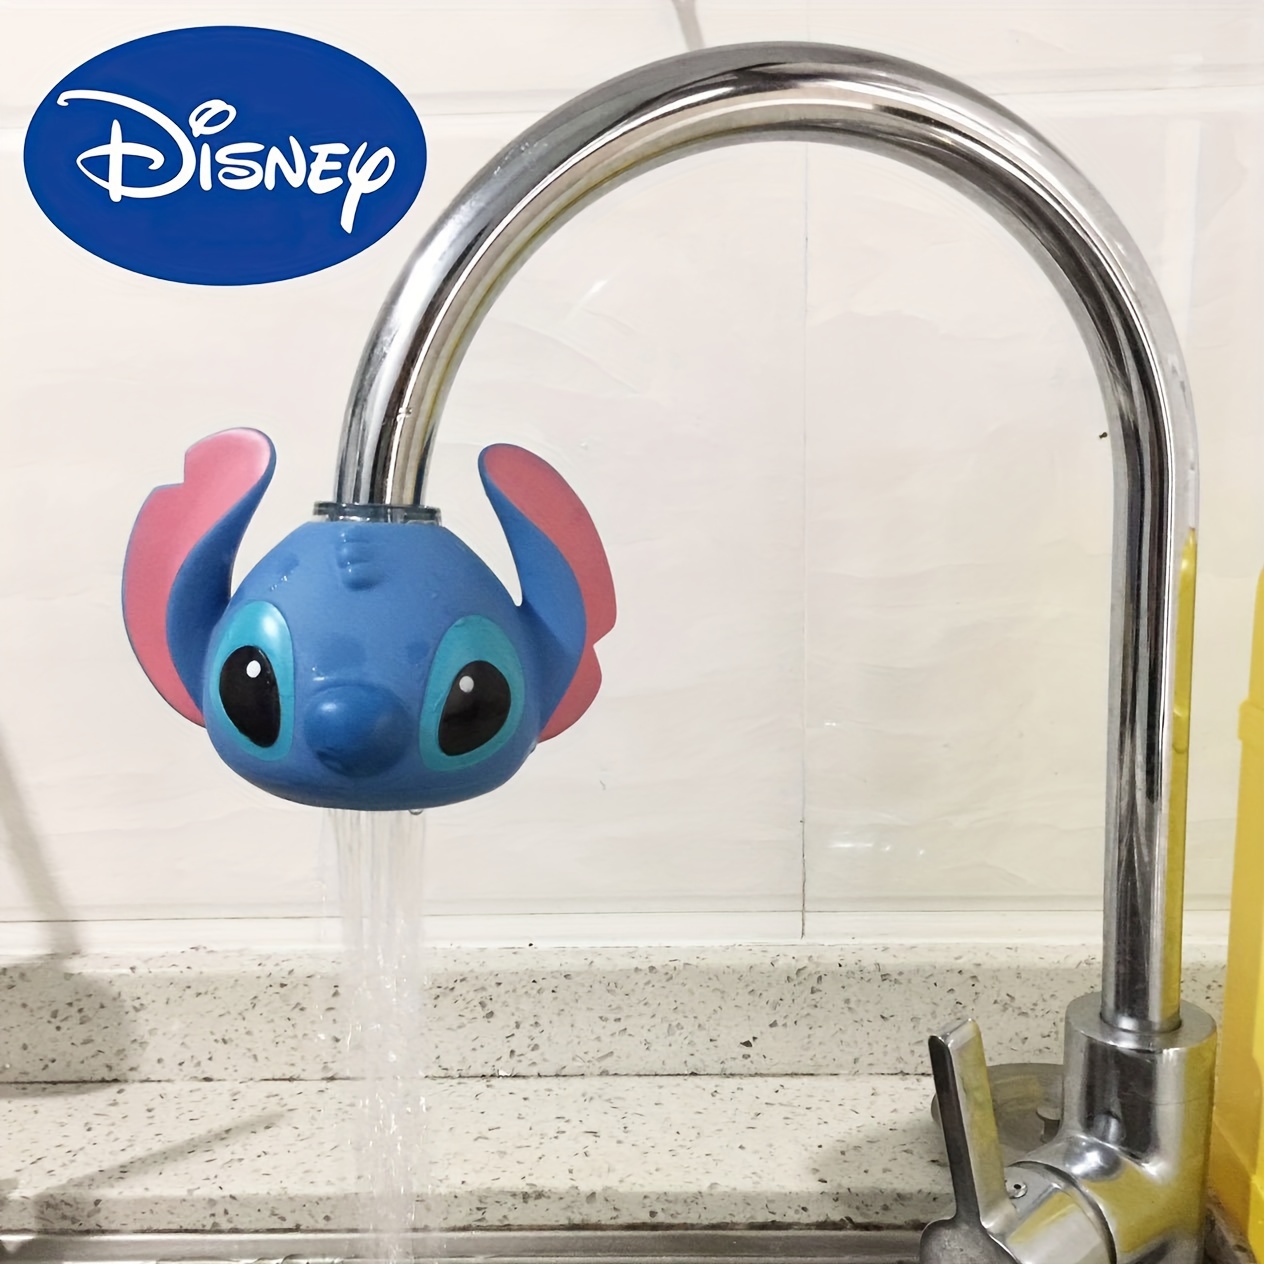 

Disney Magnetic Water Filter - Kitchen Faucet Splash Guard, Purifier With Medical Stone, Home Decor Extender By Ume